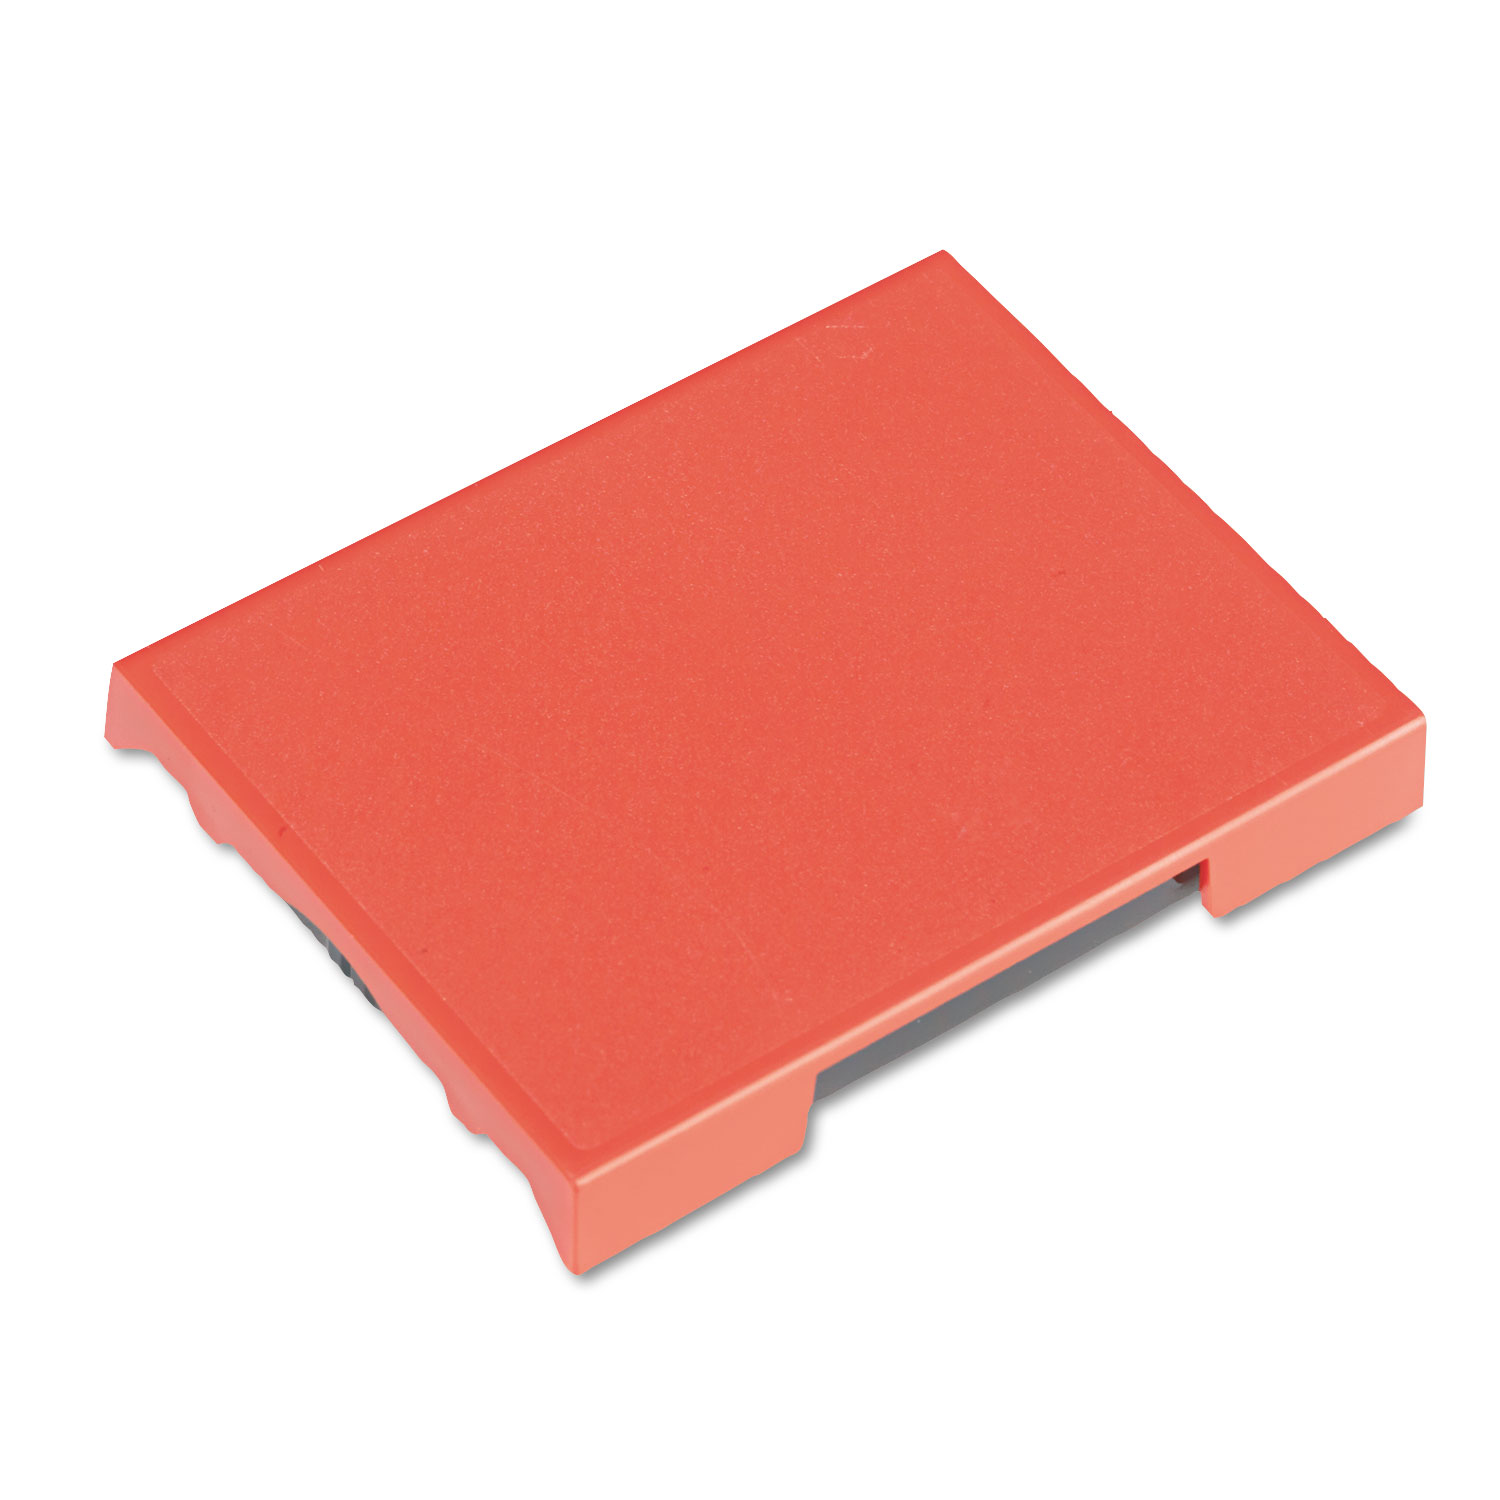 Trodat T4727 Dater Replacement Pad, 1 5/8 x 2 1/2, Red